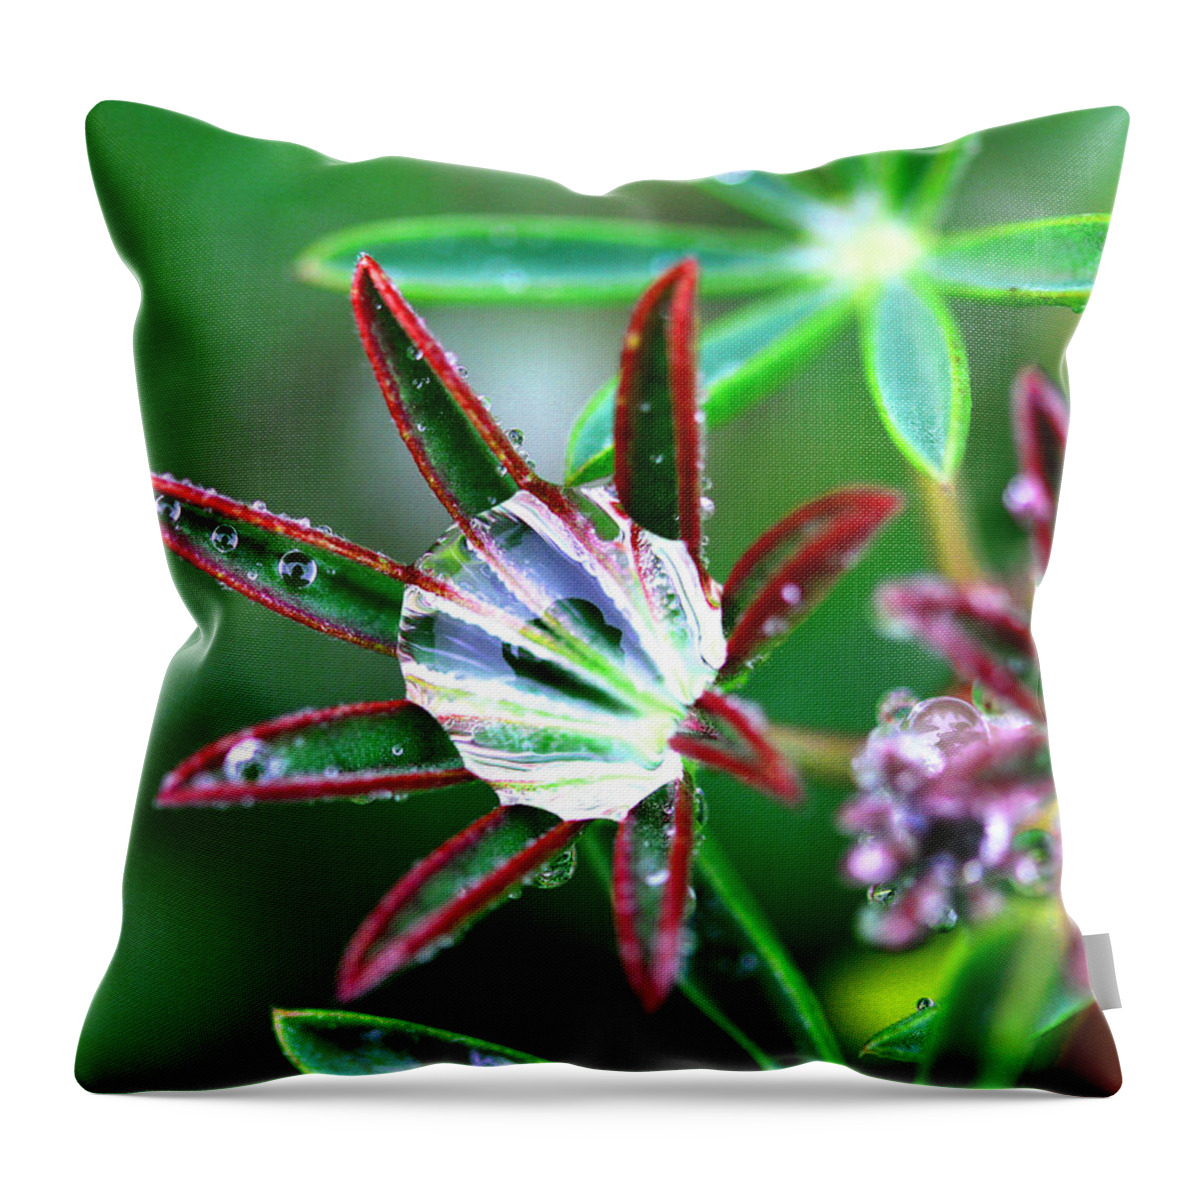 Rain Throw Pillow featuring the photograph Starry Droplets by Marie Jamieson